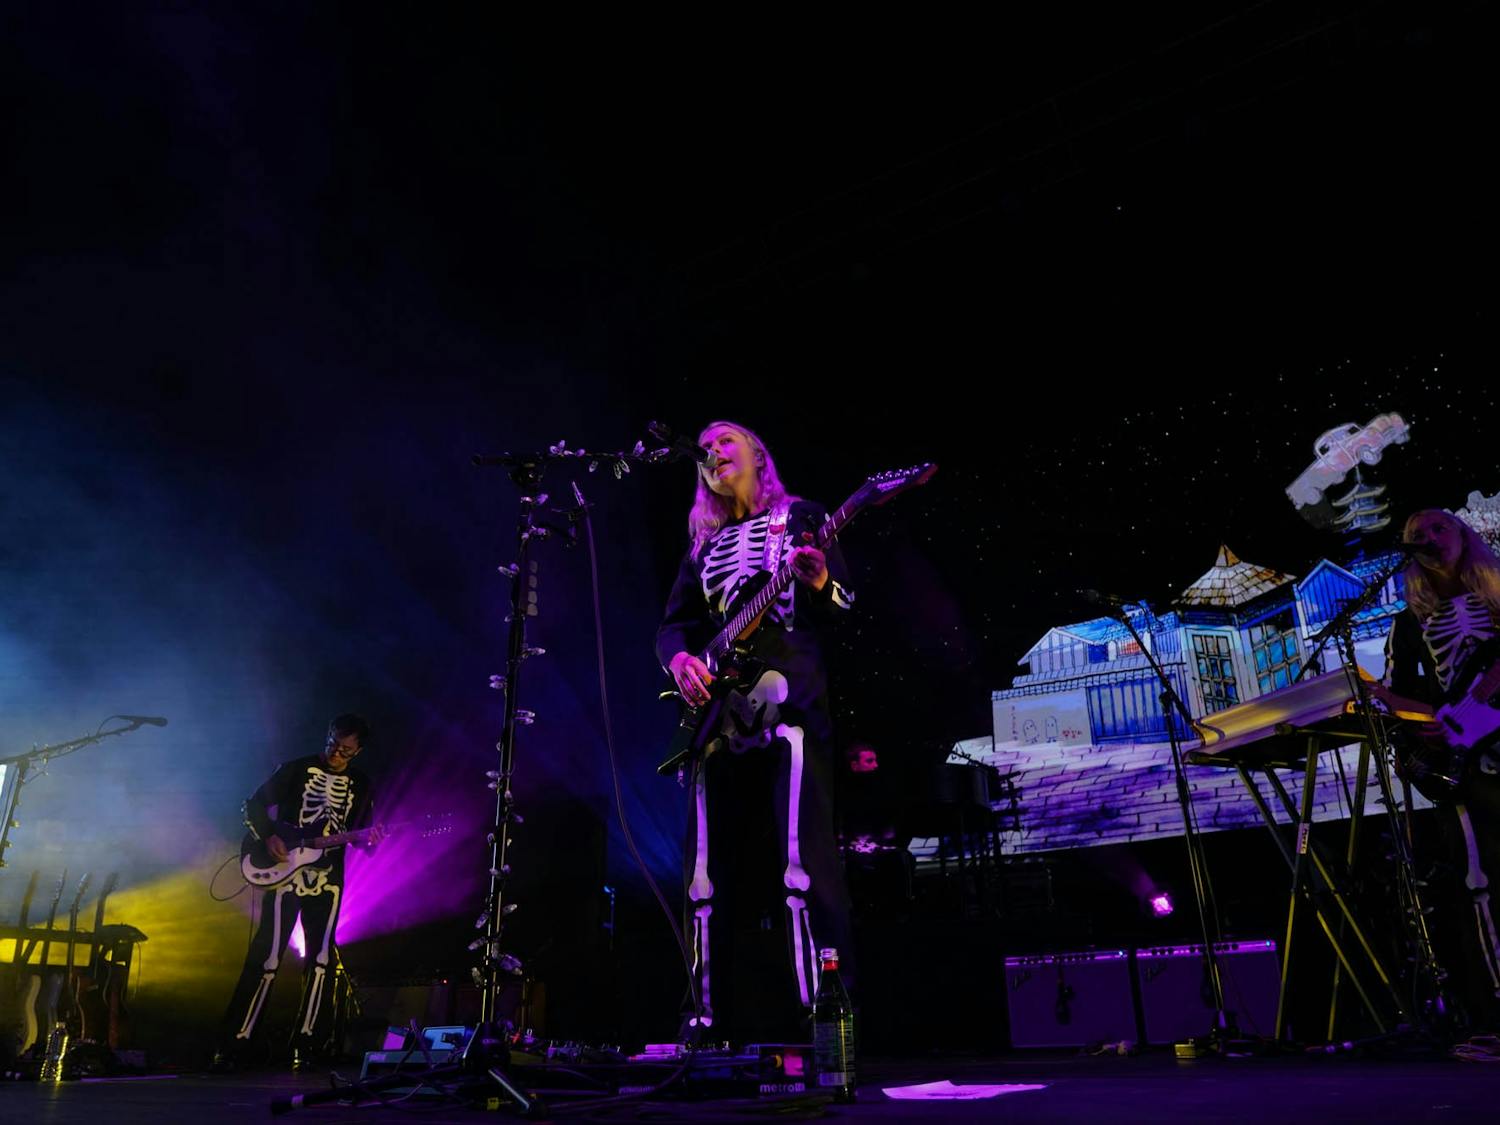 Phoebe Bridgers performed at Red Hat Amphitheater in Raleigh on Sept. 22, 2021. The concert was part of Bridgers' "Reunion Tour." MUNA opened for Bridgers, performing ten songs. Photos by Calli Westra and Ira Wilder.&nbsp;